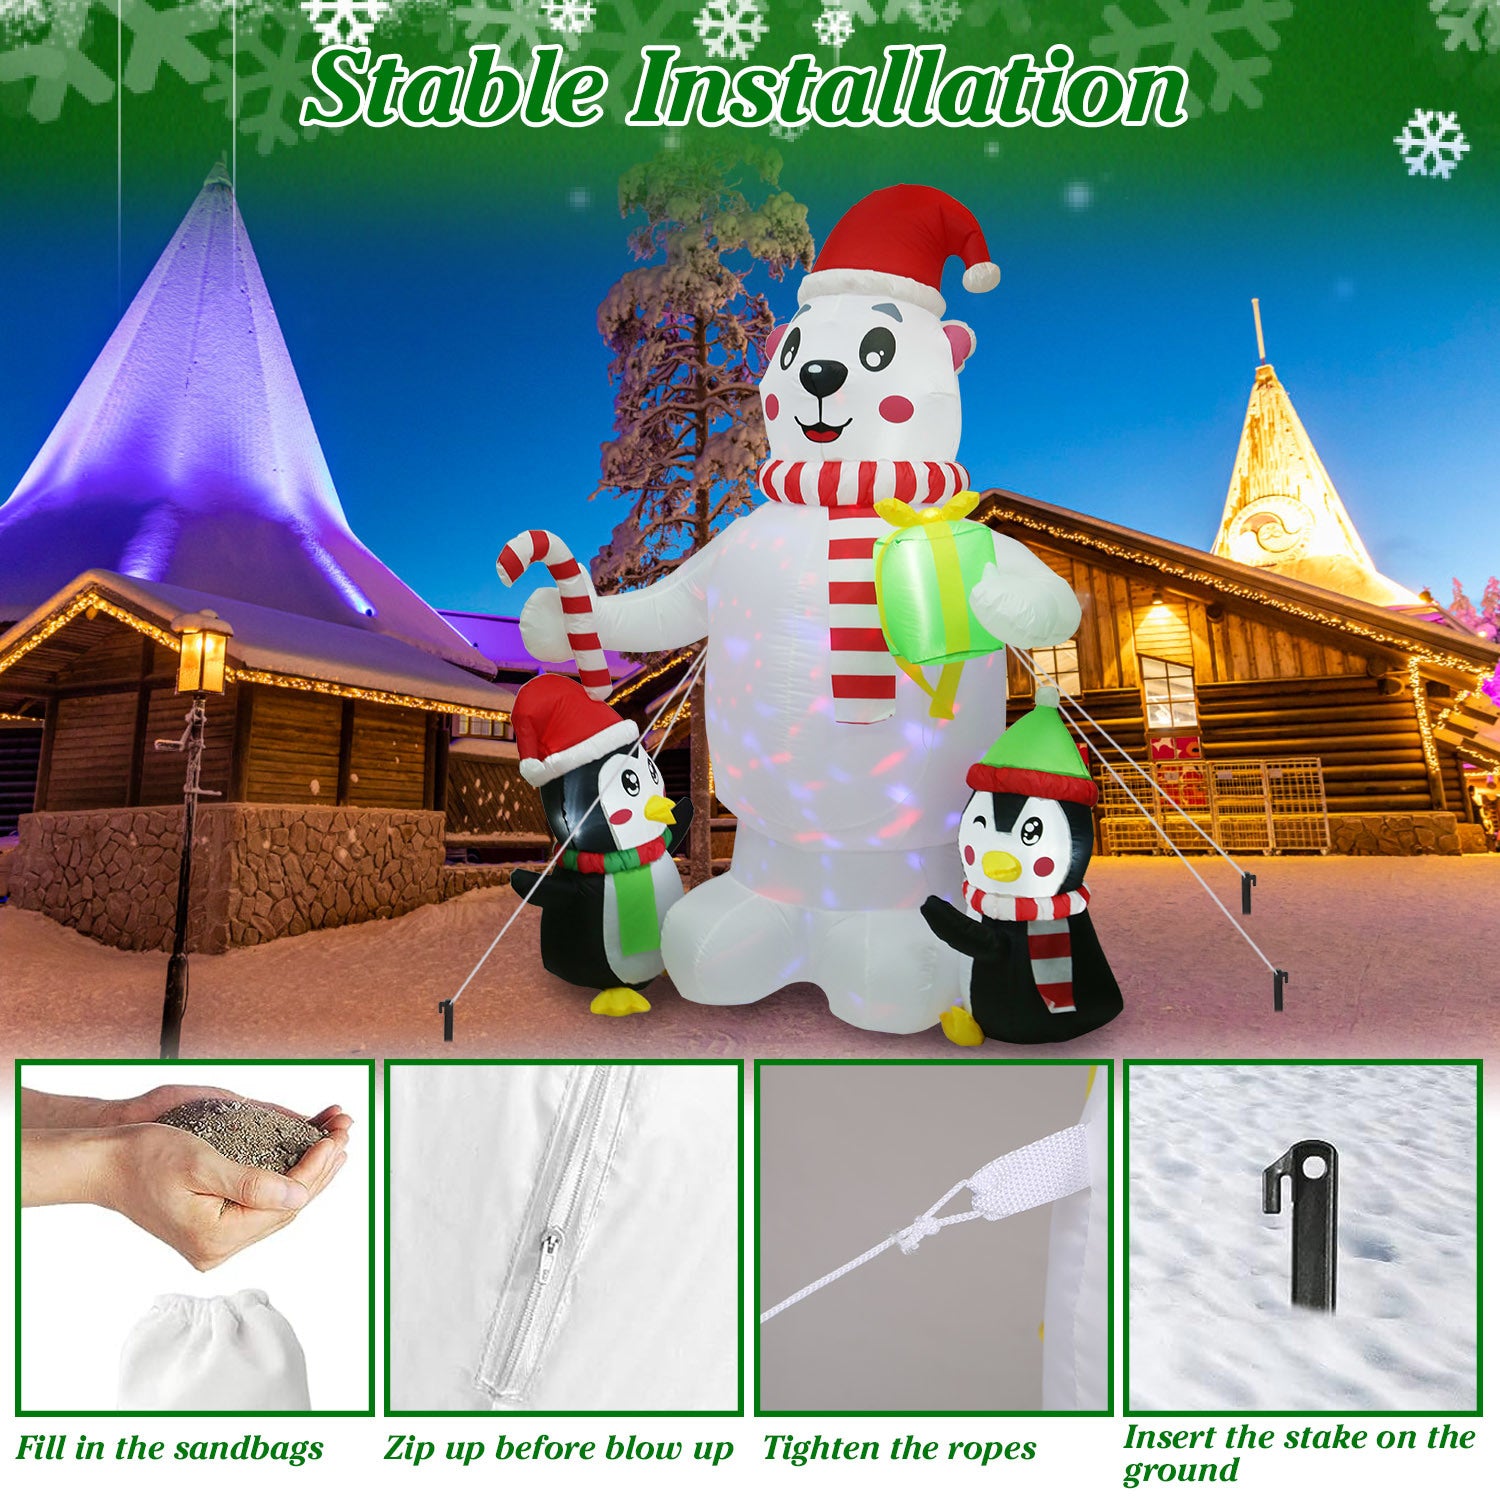 An impressive 5.9FT Christmas Inflatable Outdoor Decoration Polar Bear Gift Box Penguin Blow Up Yard Decoration with LED Light Built-in Air Blower for Winter Holiday Xmas Garden featuring a large inflatable polar bear and penguins in front of a house.